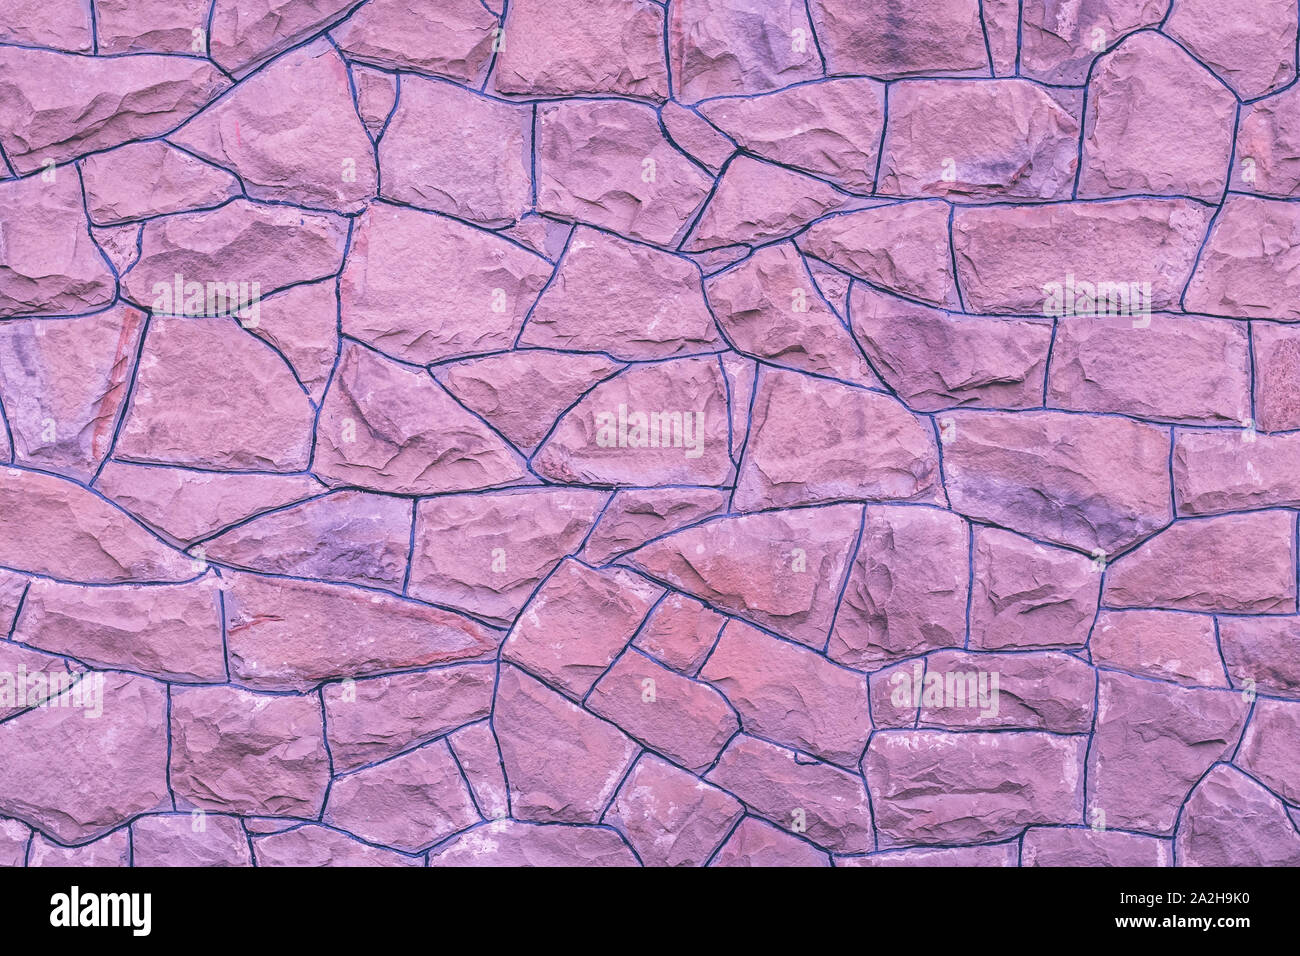 Purple stone wall background. Light pink texture of rocks. Bricks natural pattern. Abstract architecture backgrounds. Masonry rough surface, modern de Stock Photo